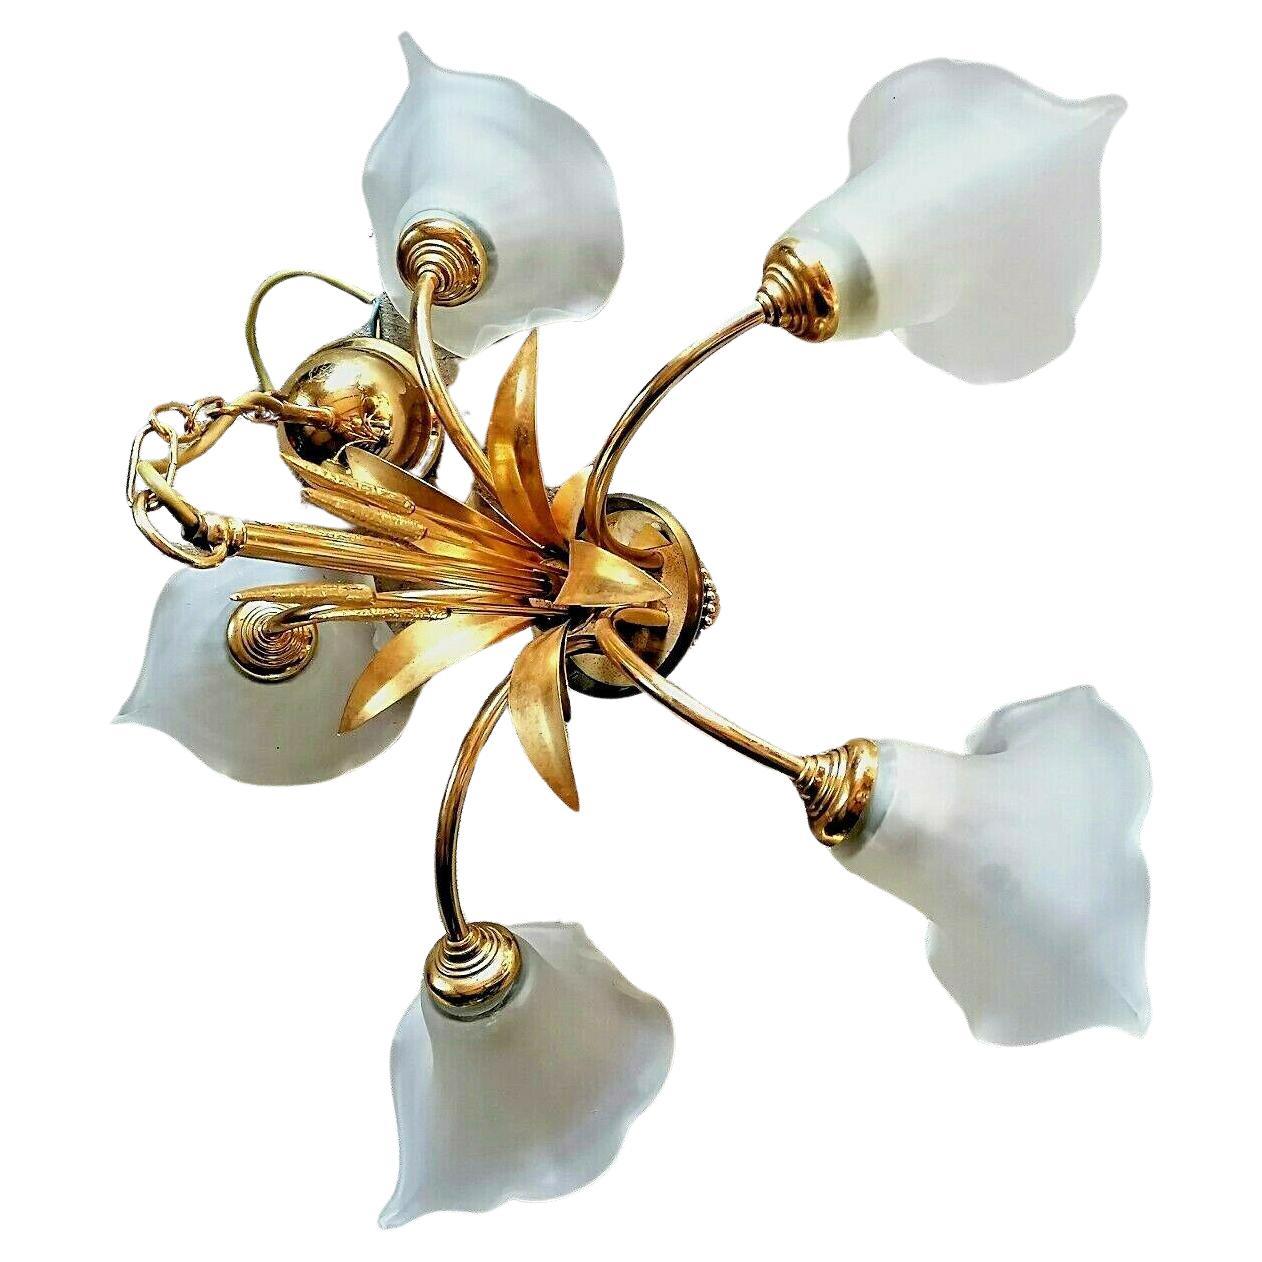 1960's French Mid Century Modern Gilt Floral Form Chandelier with Floral Shades